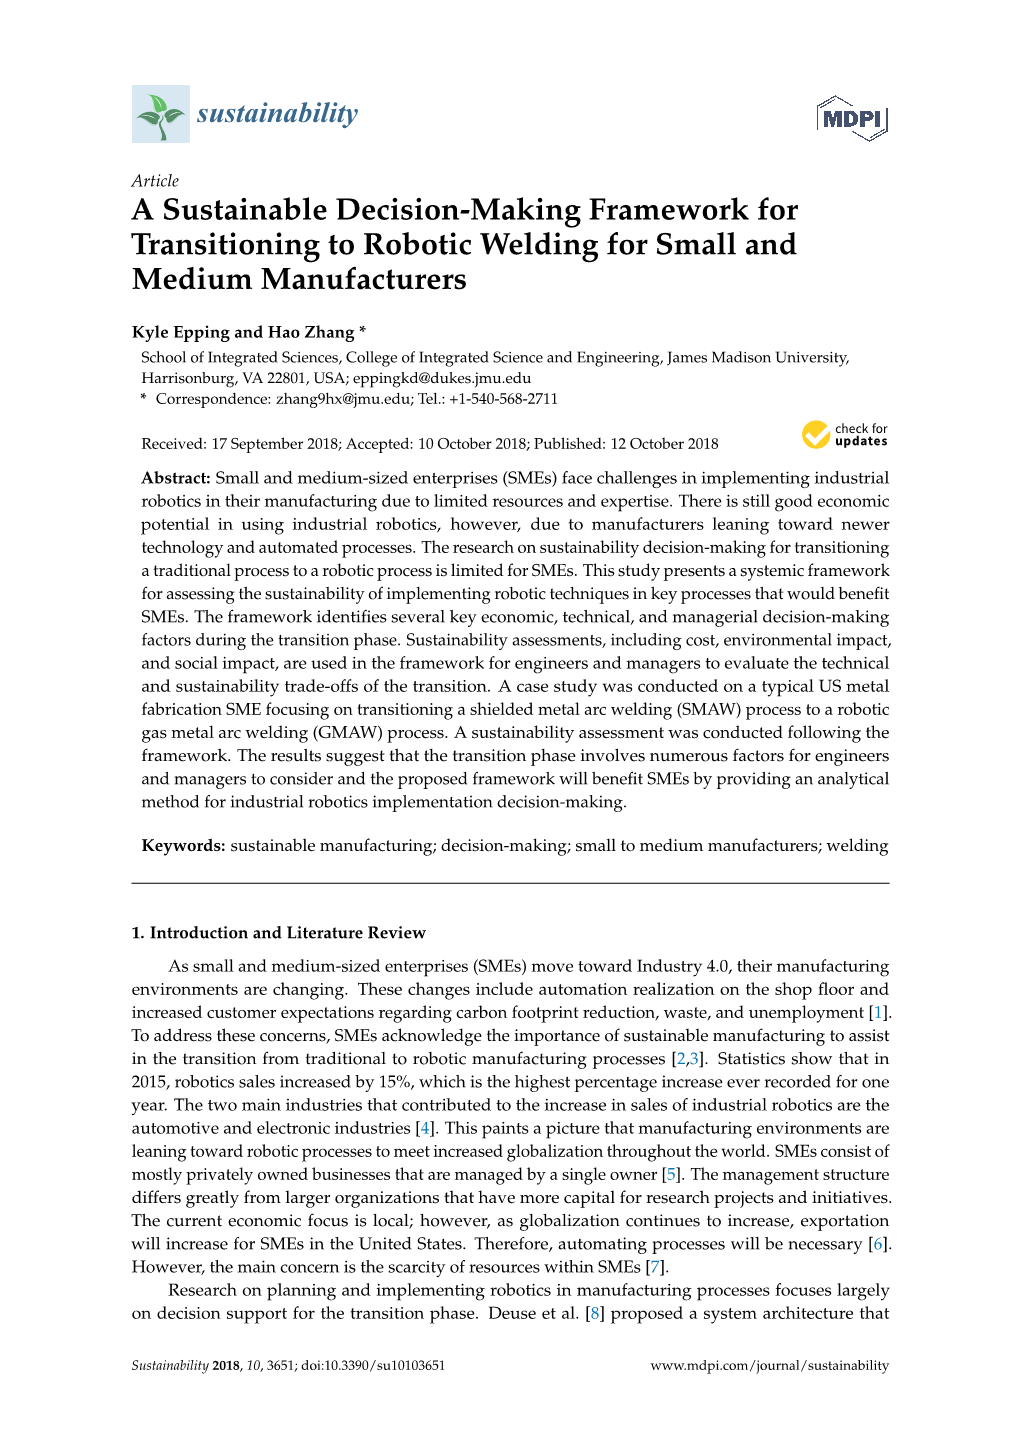 A Sustainable Decision-Making Framework for Transitioning to Robotic Welding for Small and Medium Manufacturers